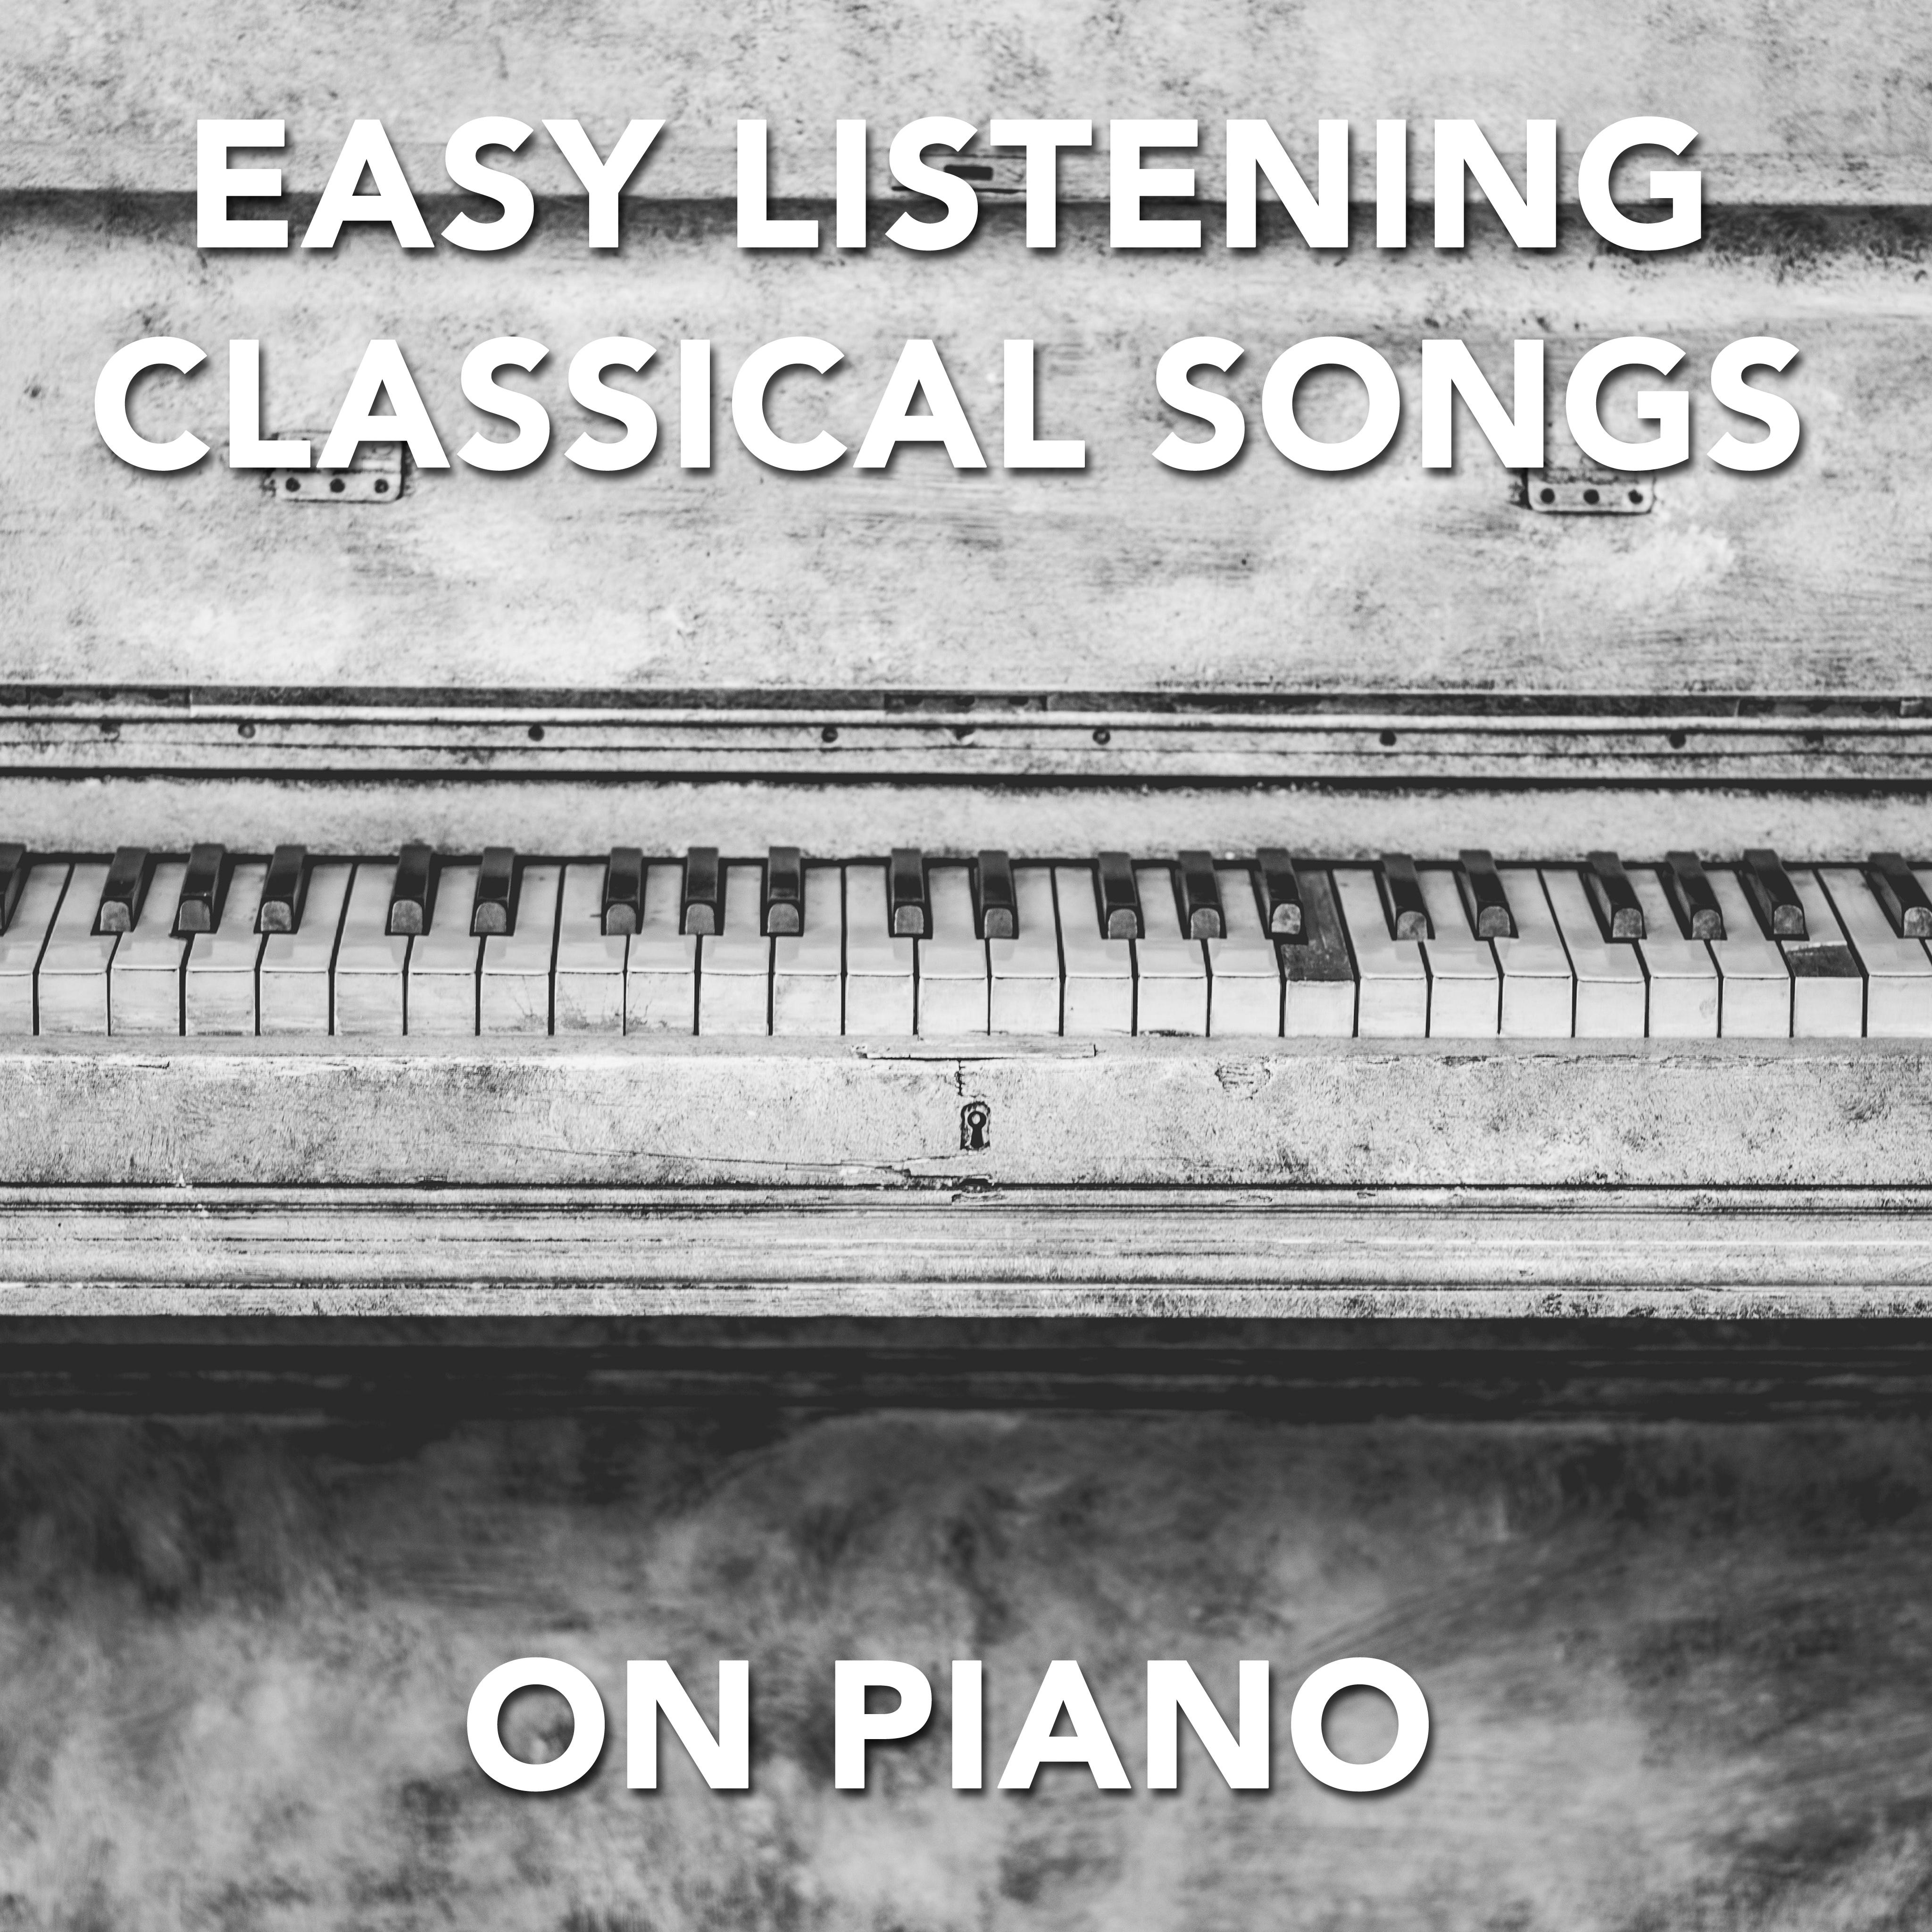 11 Easy Listening Classical Songs on Piano